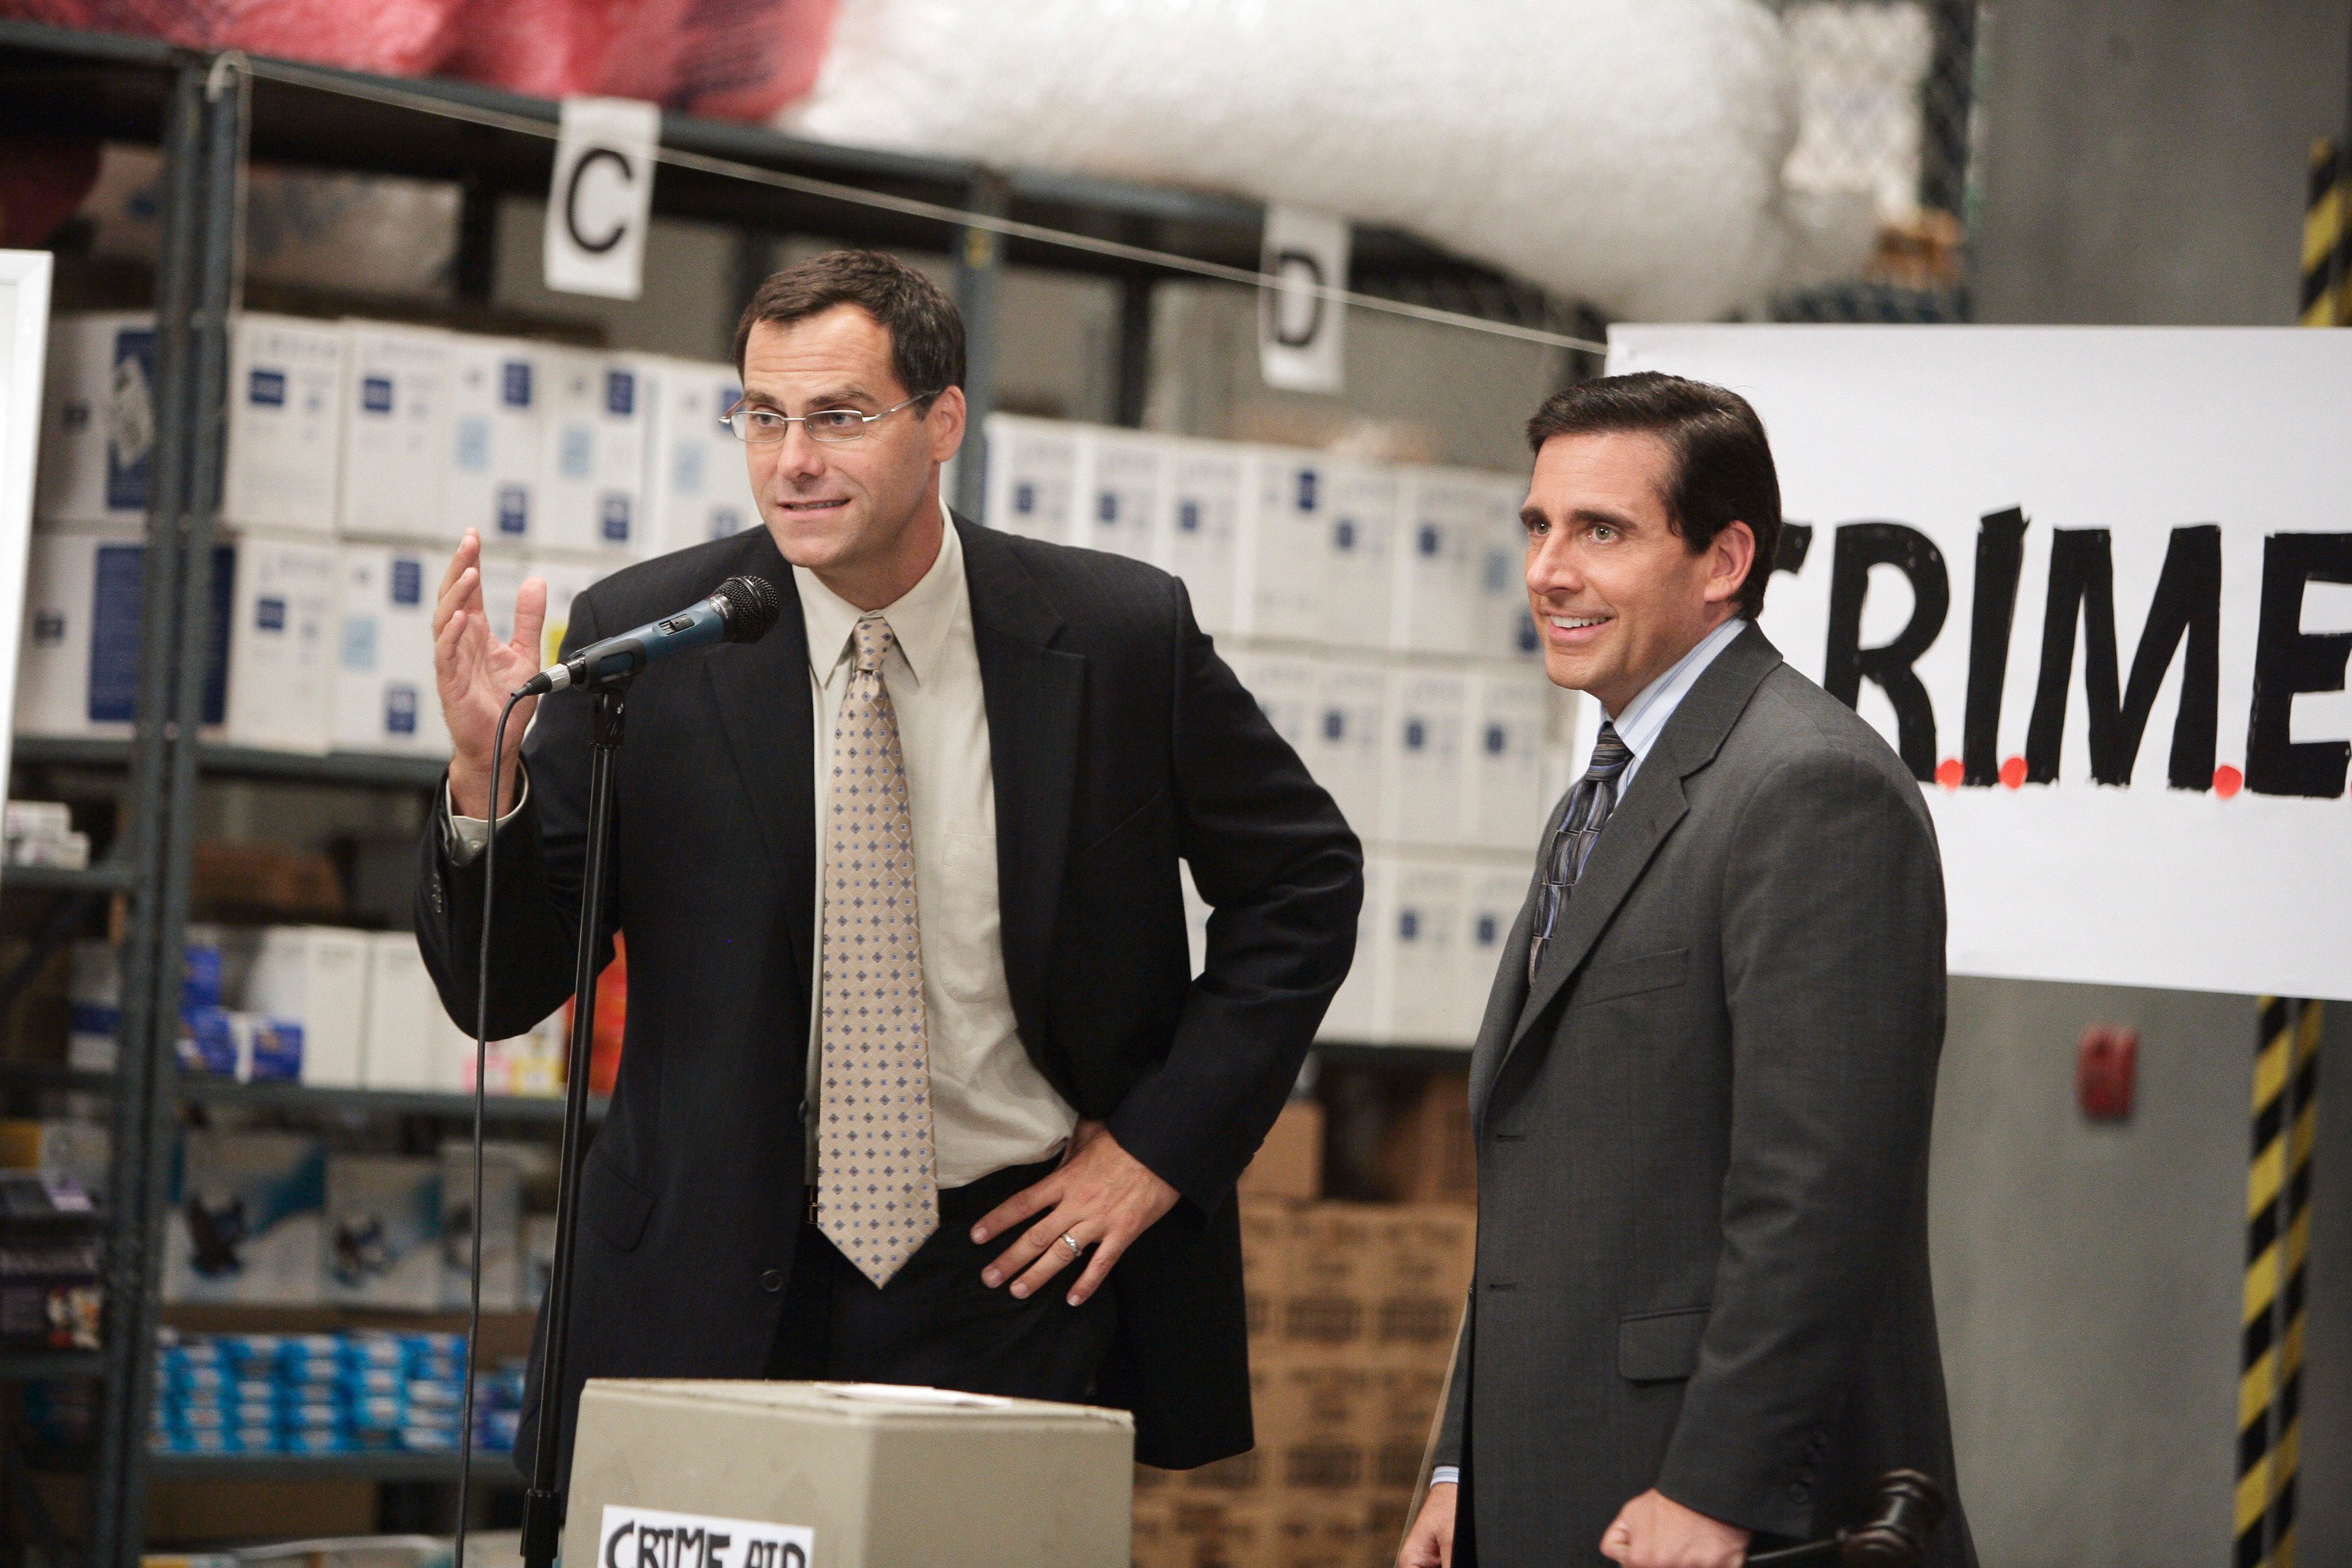 Andy Buckley as David Wallace and Steve Carell as Michael Scott in 'The Office'